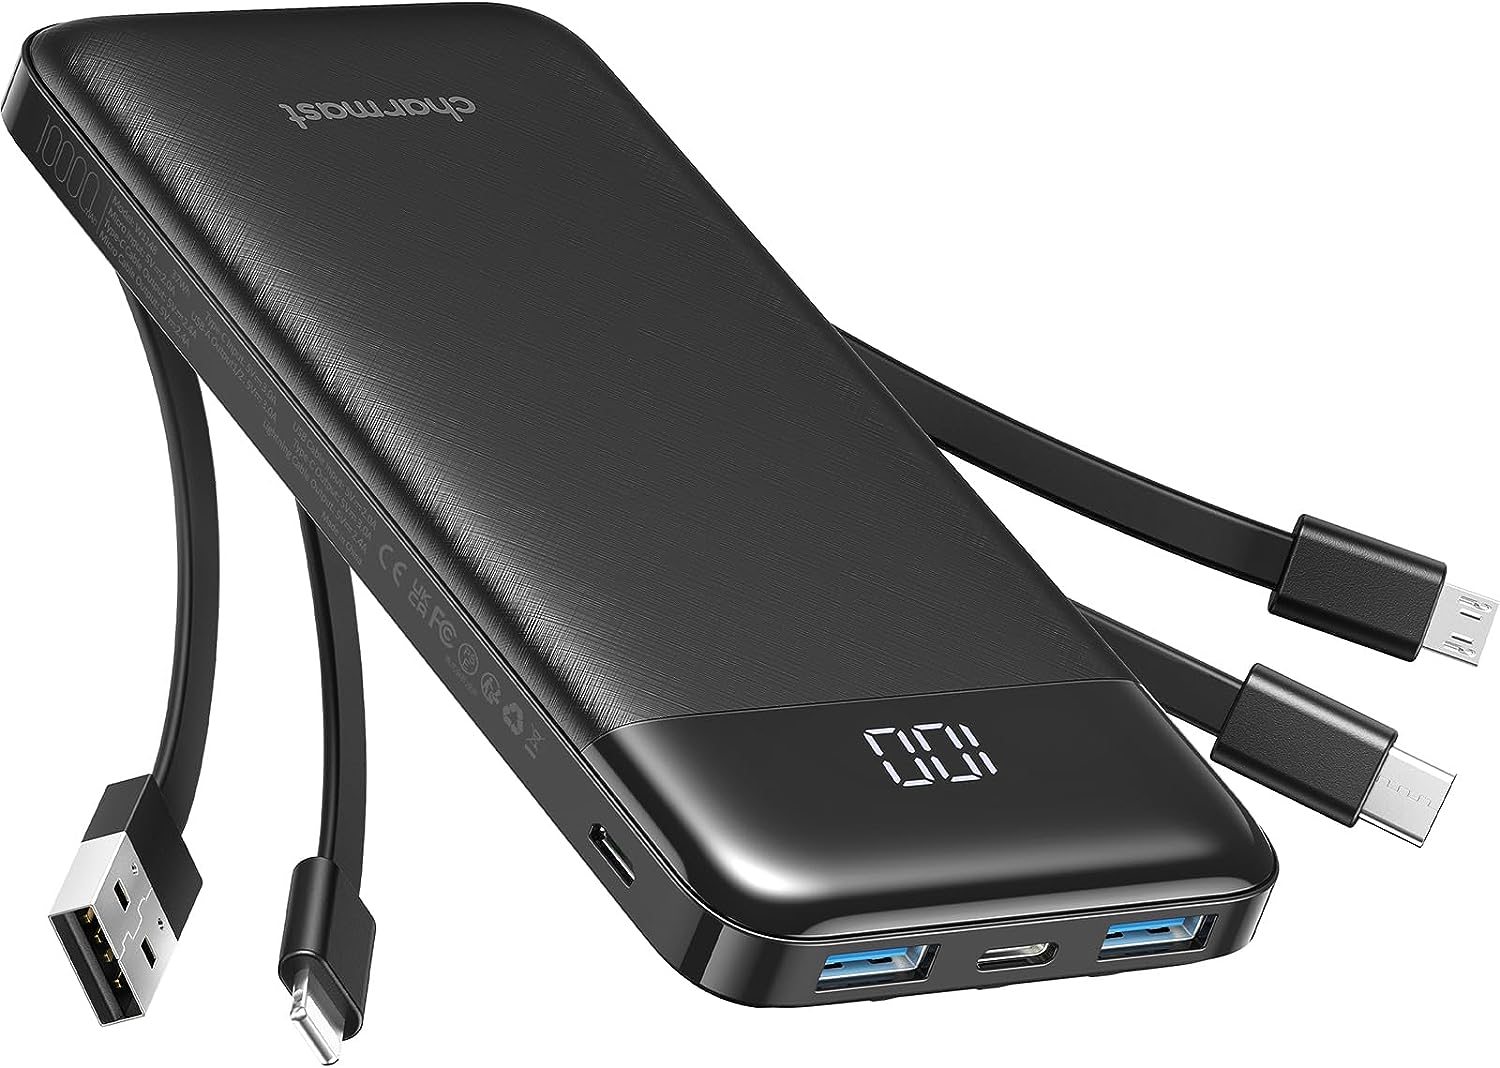 Power bank charger for phones - gifts for teenage boys